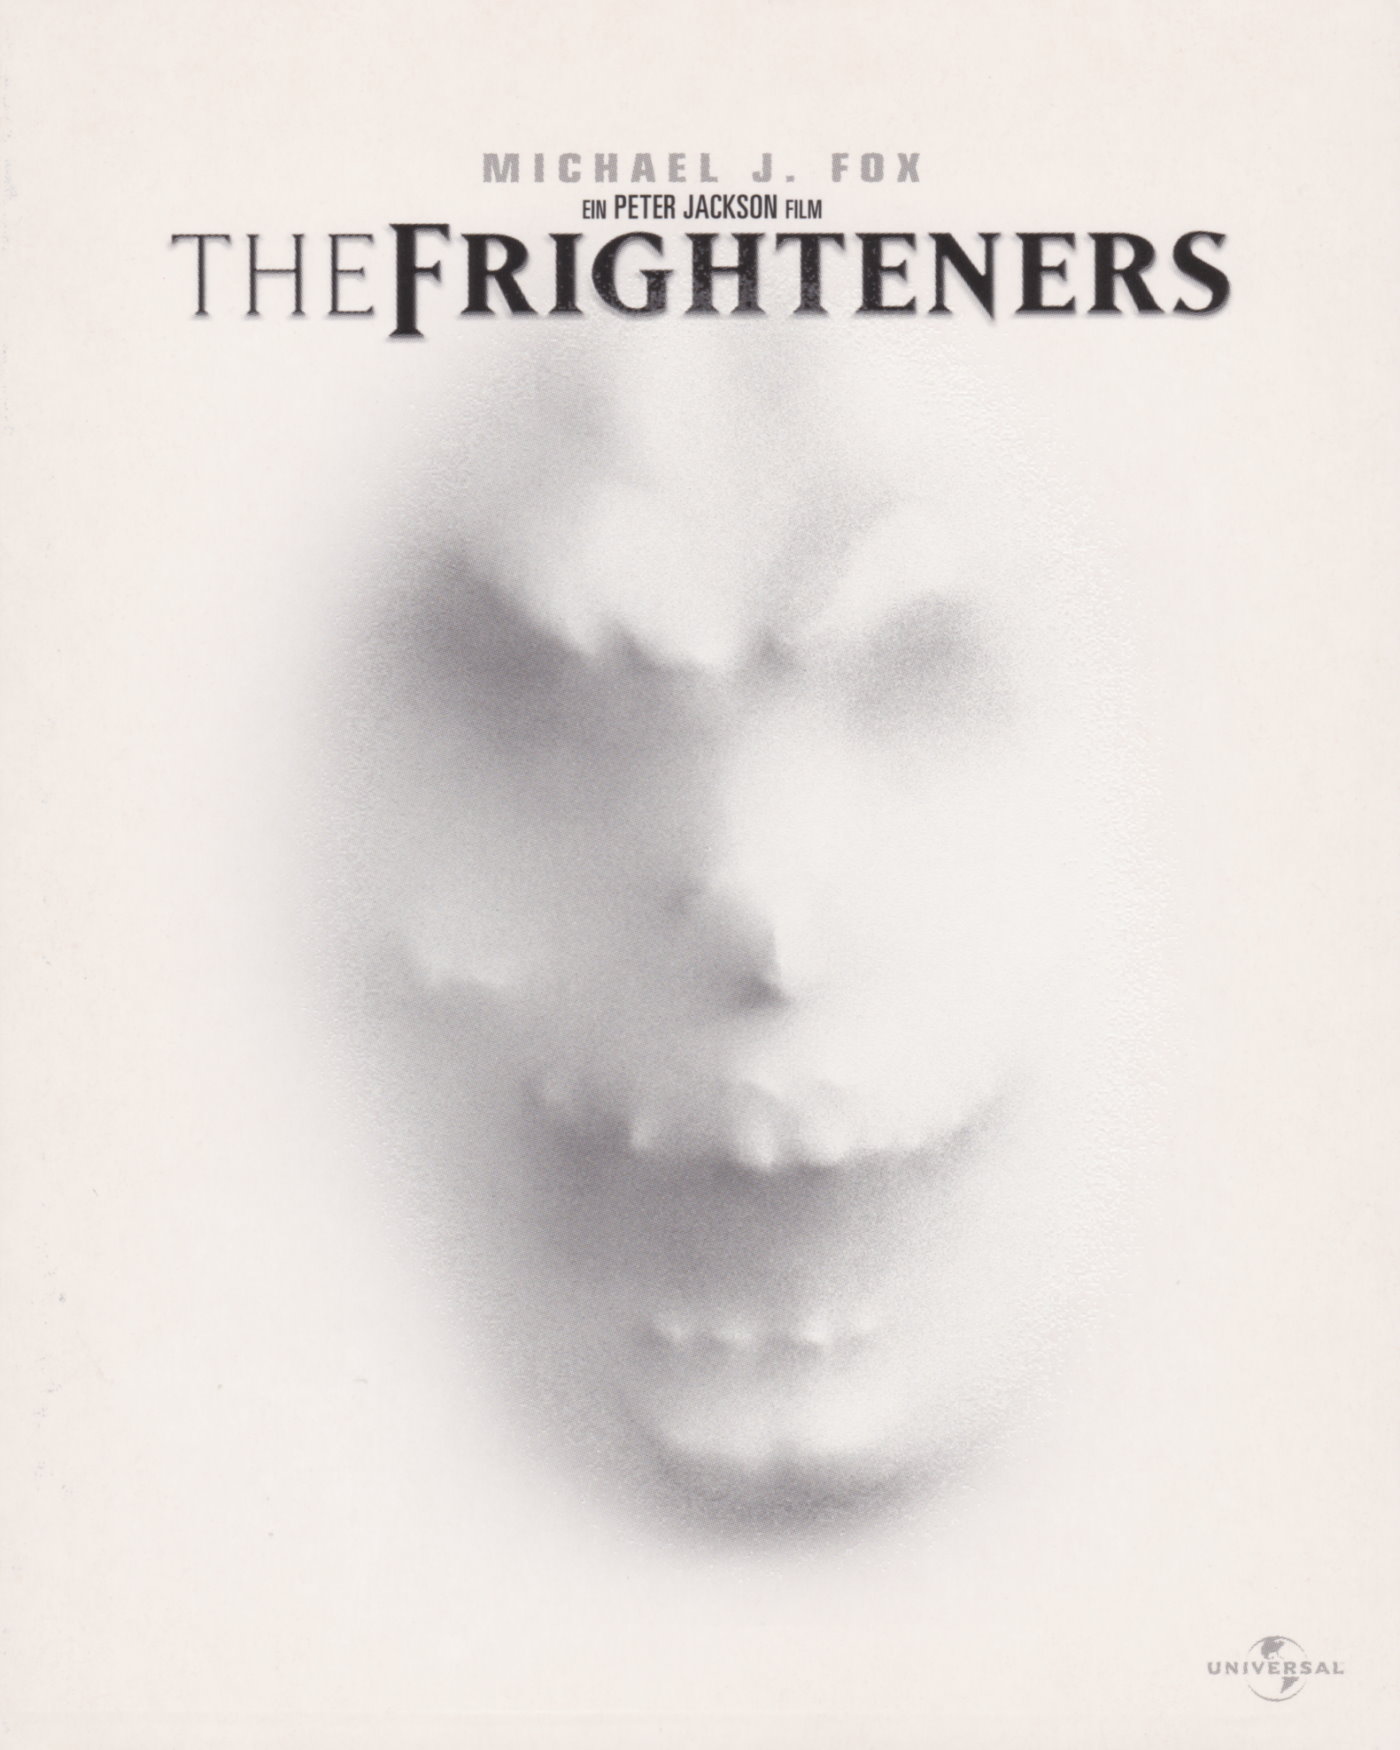 Cover - The Frighteners.jpg